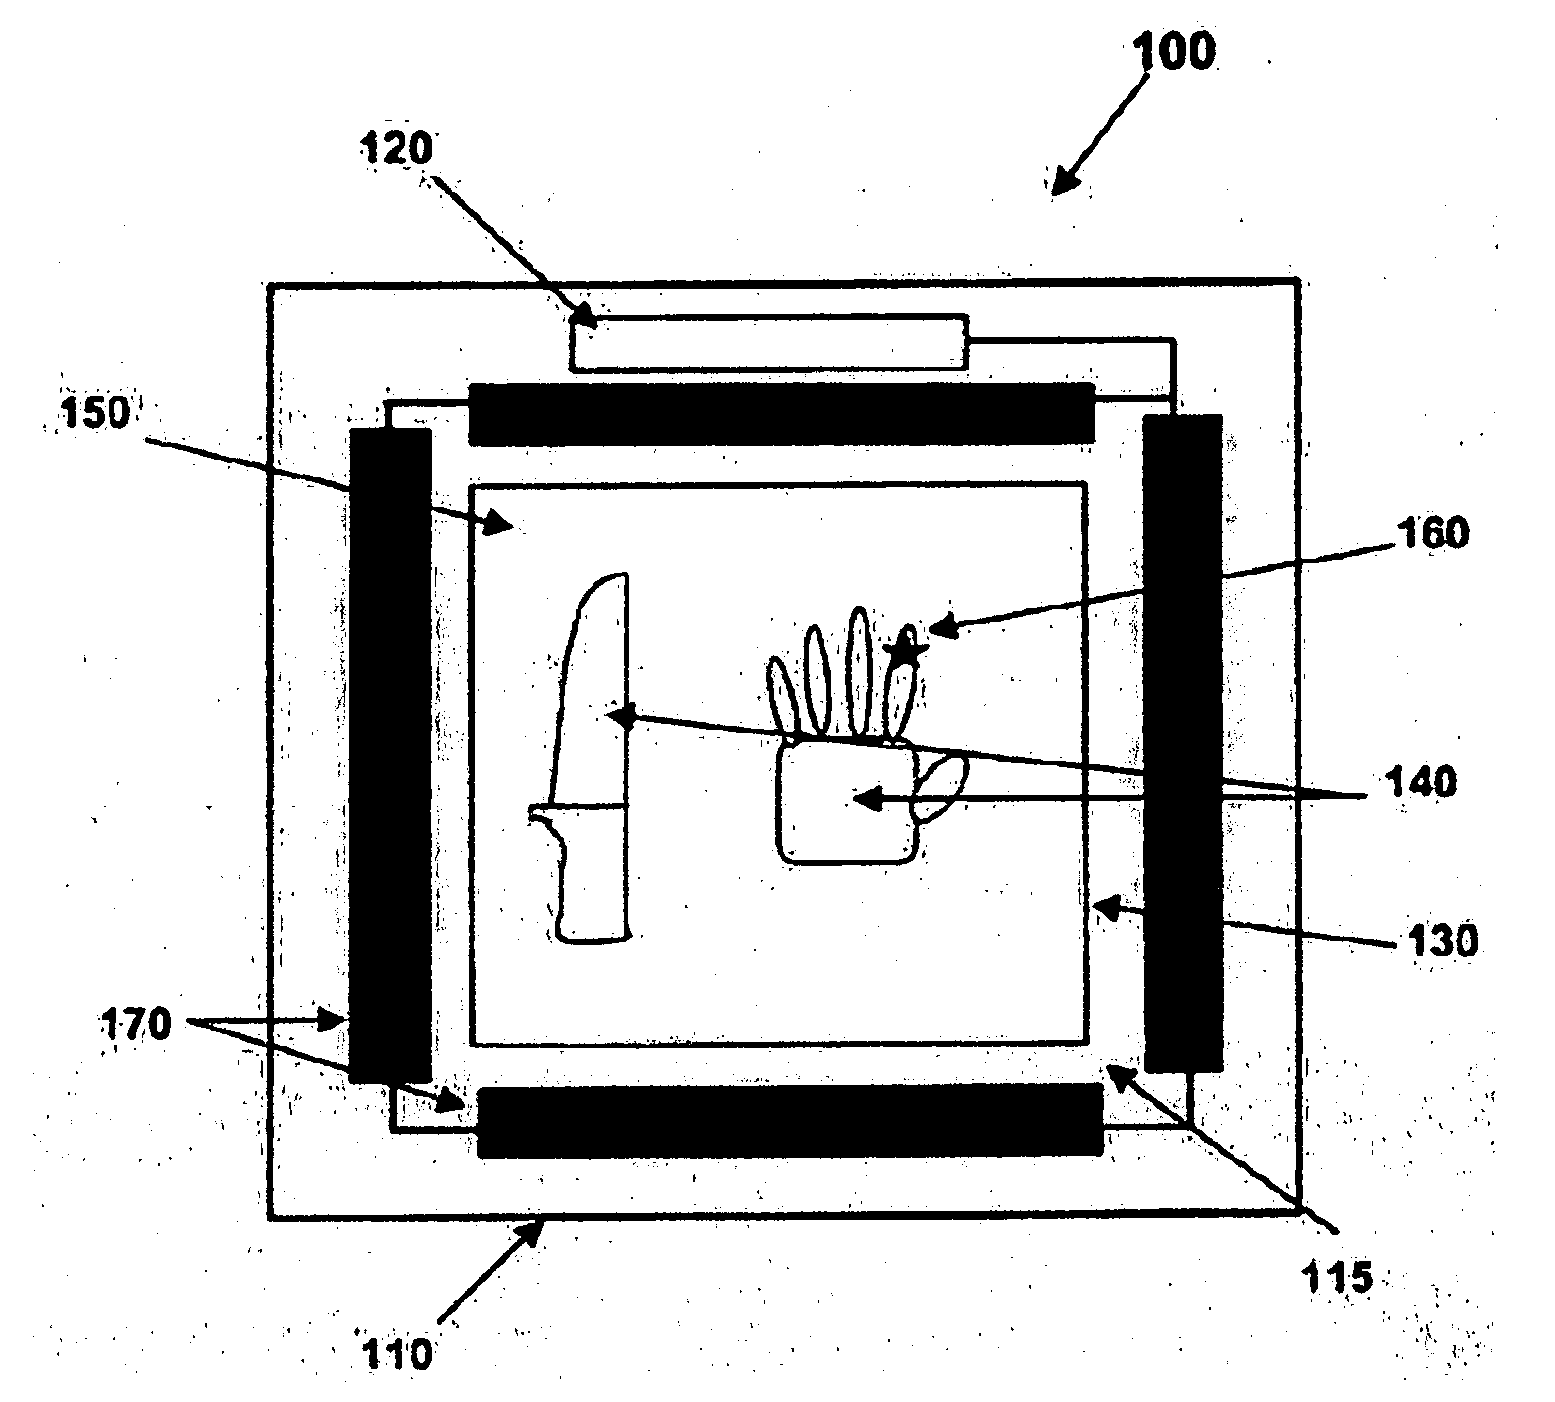 Apparatus and method for detecting human fecal contamination on hands and other objects using an illumination imaging device